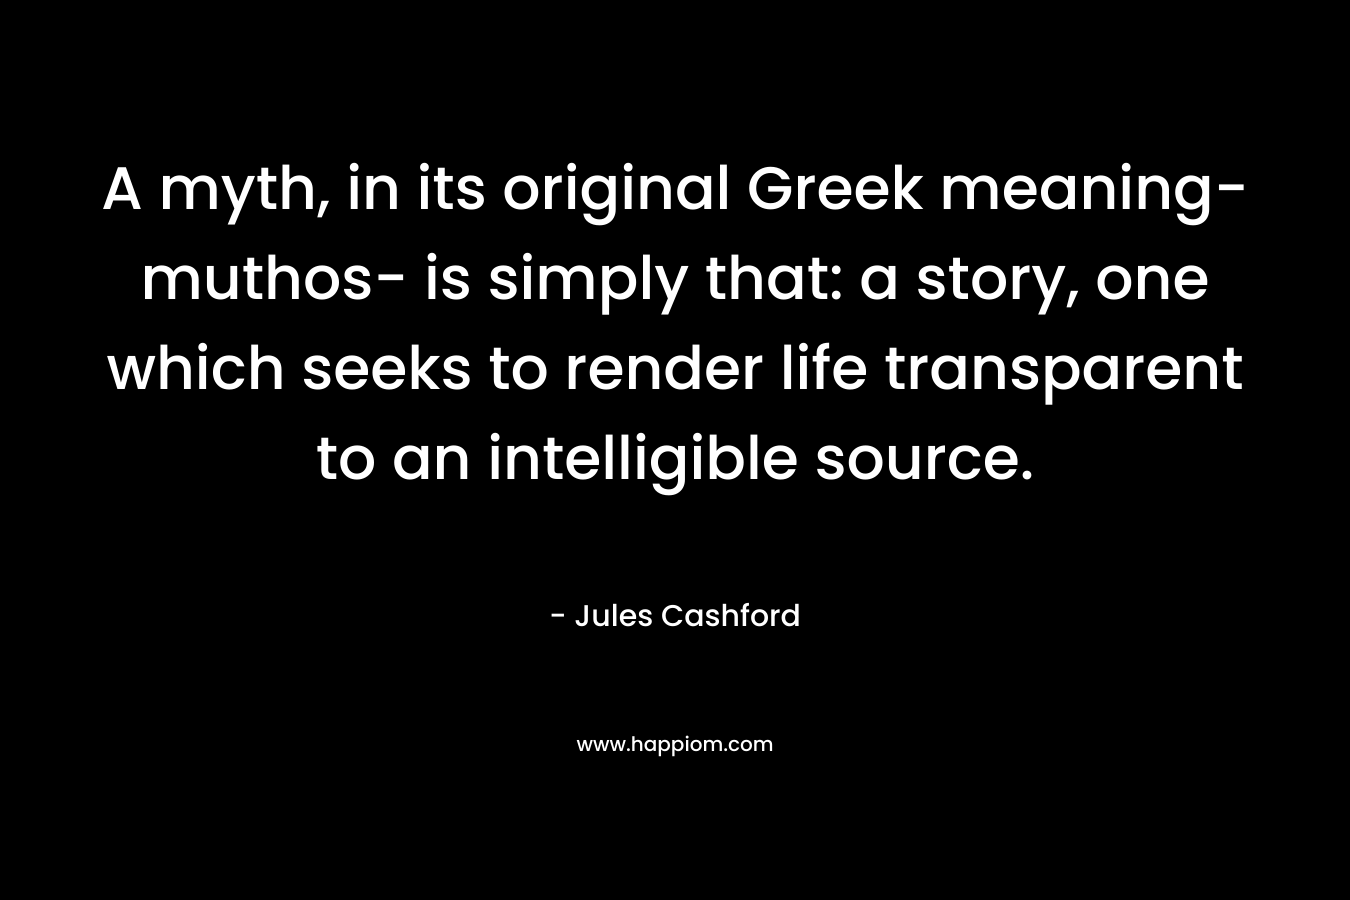 A myth, in its original Greek meaning- muthos- is simply that: a story, one which seeks to render life transparent to an intelligible source.